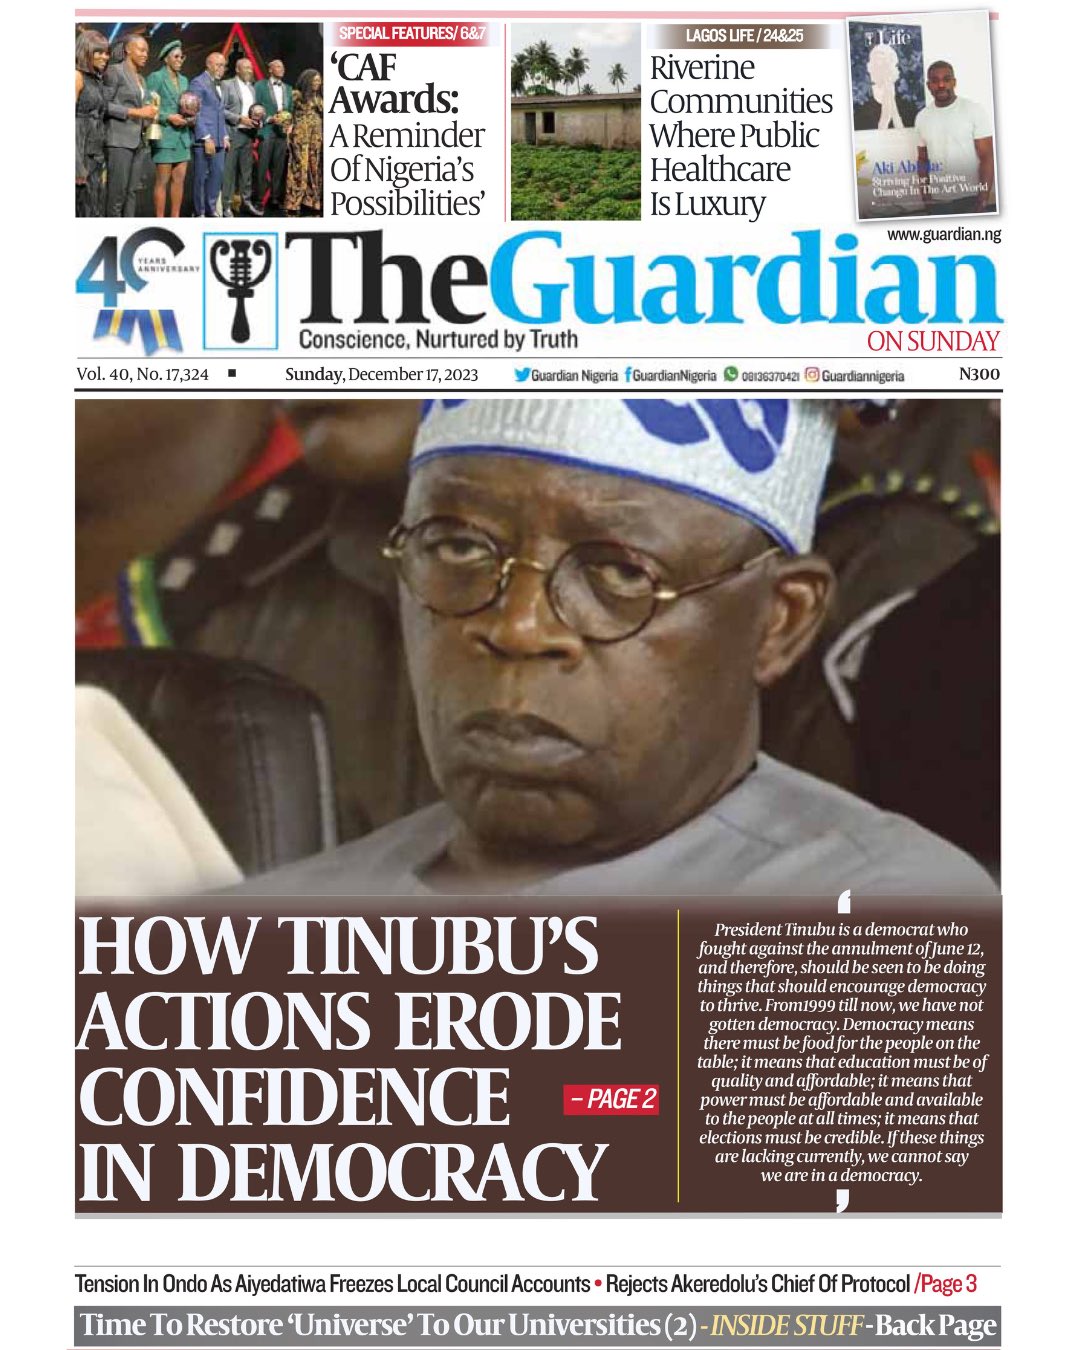 The Guardian Nigeria on X: Today in The Guardian – Acute outage imminent  as TCN, DisCos face-off deepens. Get a copy. #FrontPage #Headline #Business  #Politics #Sports #Pilgrims #Nigerians #Entertainment #News #Nigeria  #Africa #